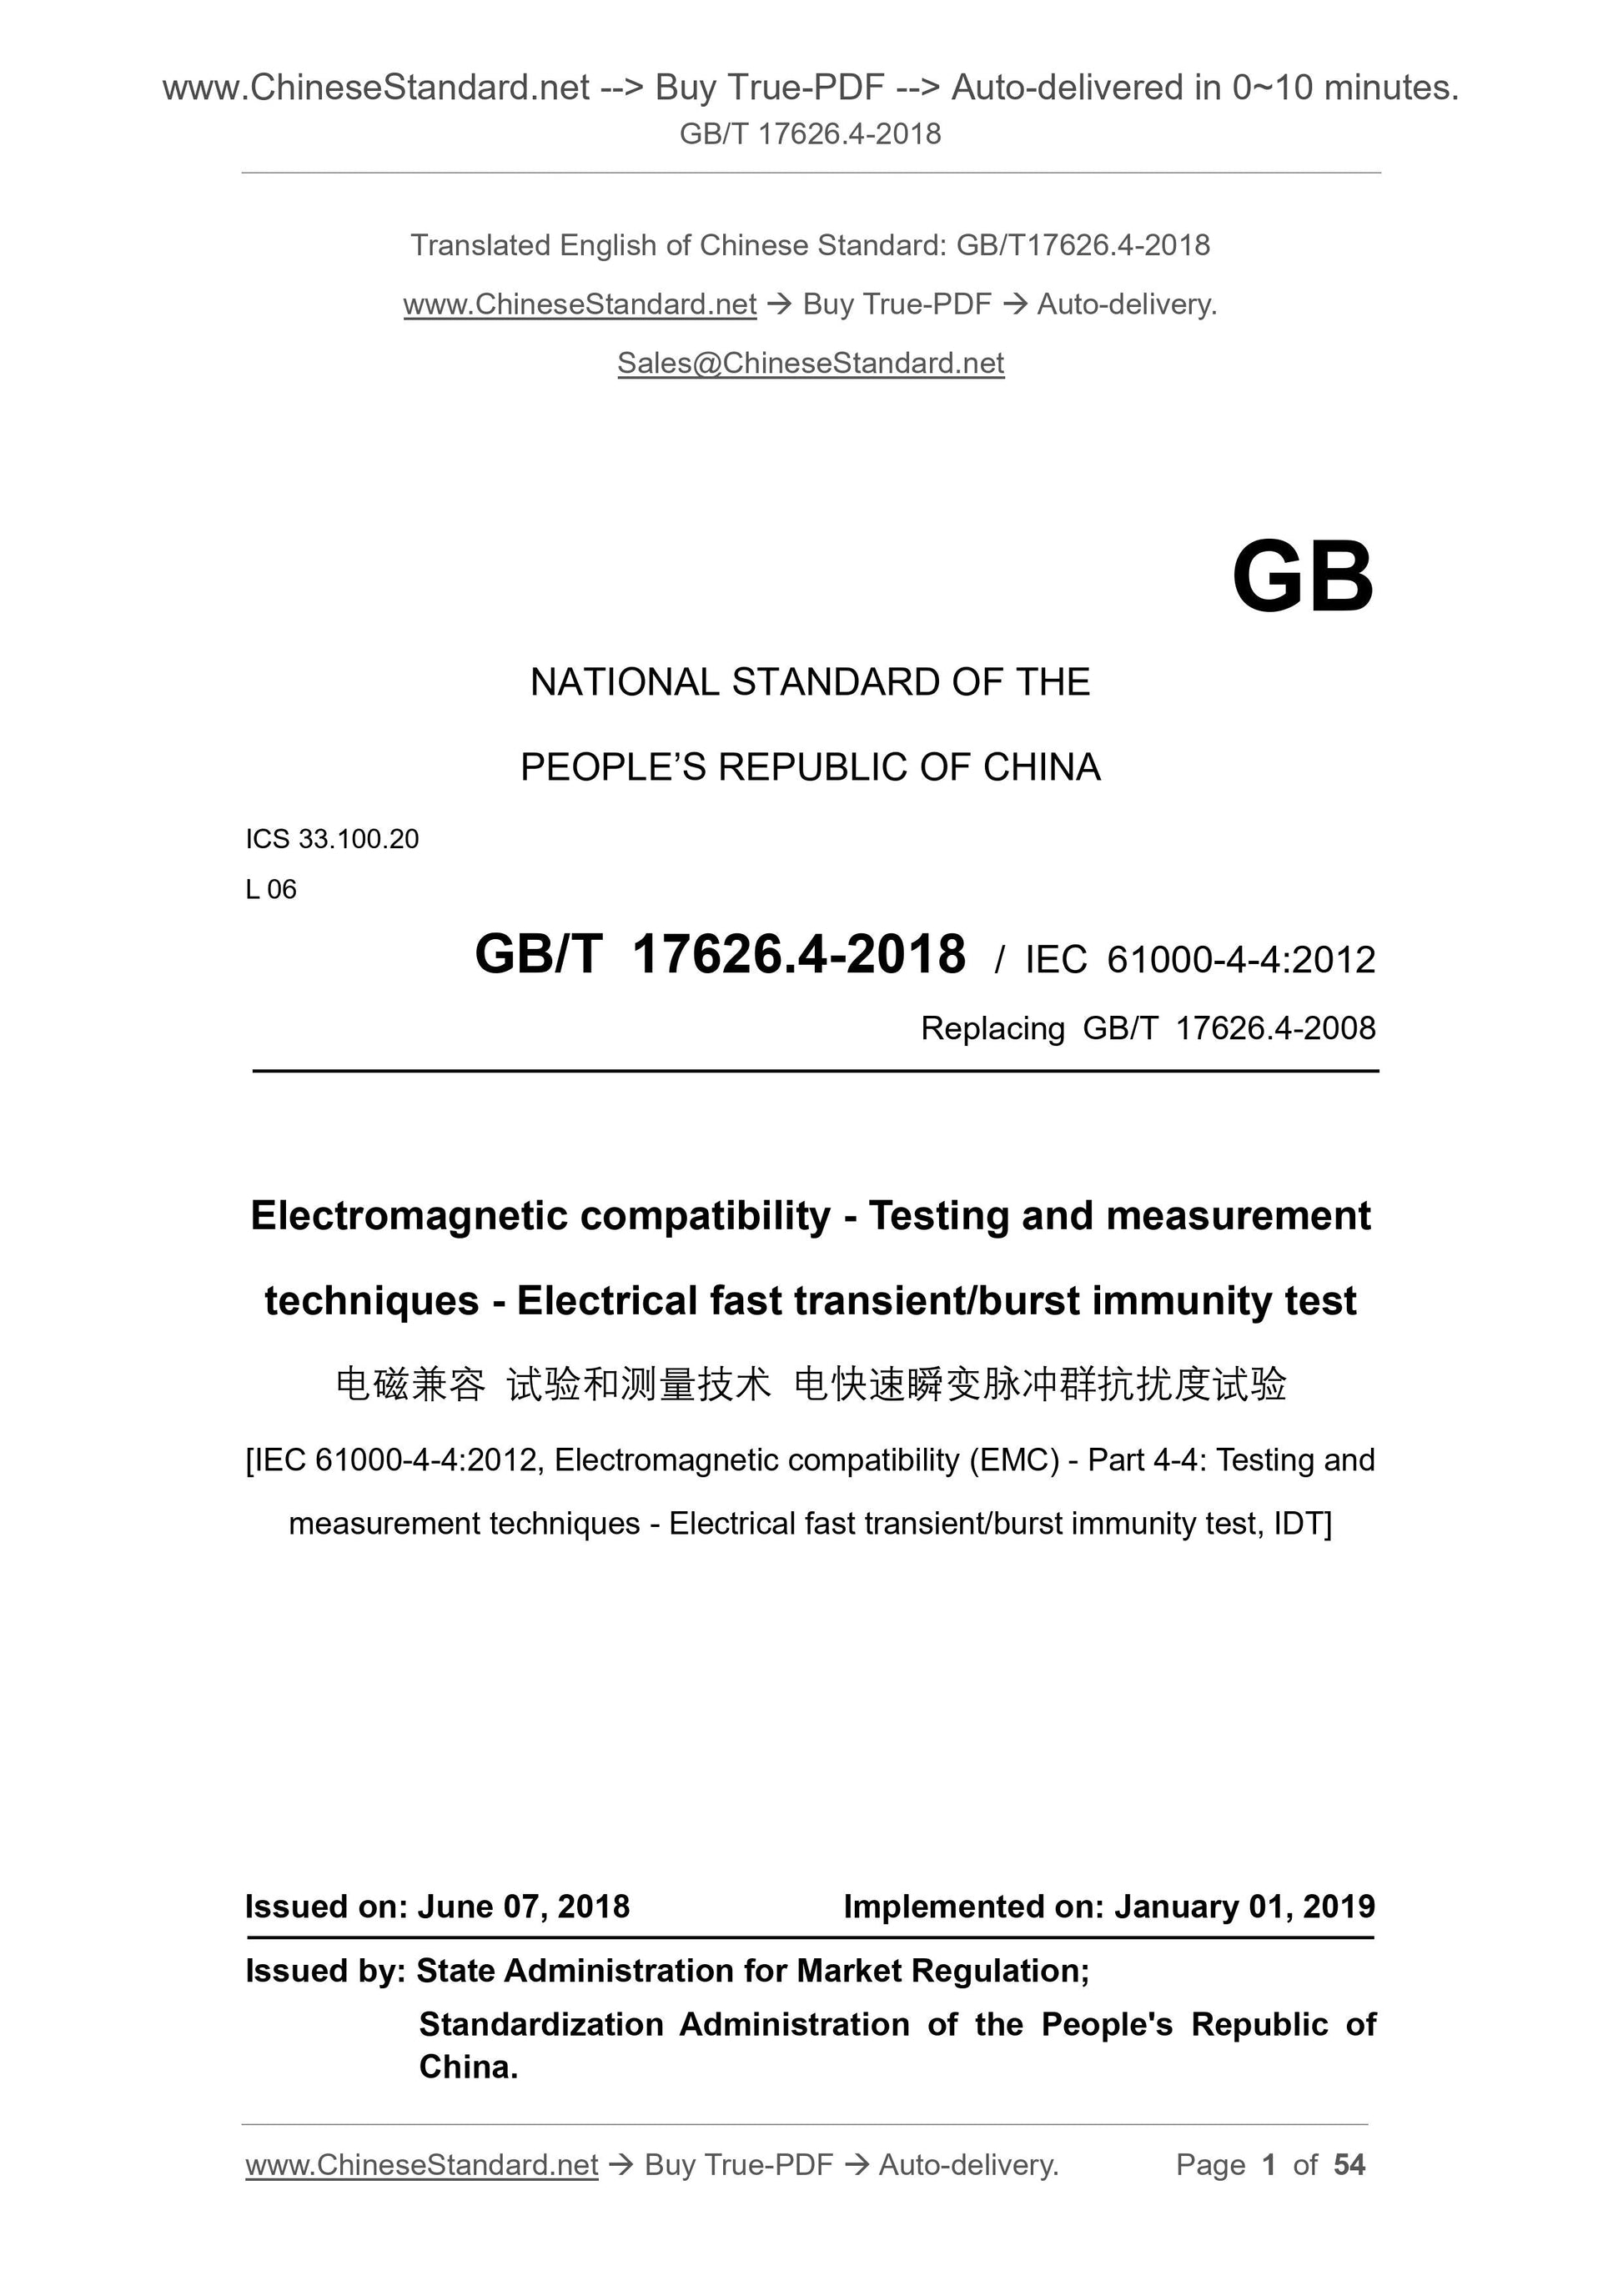 GB/T 17626.4-2018 Page 1